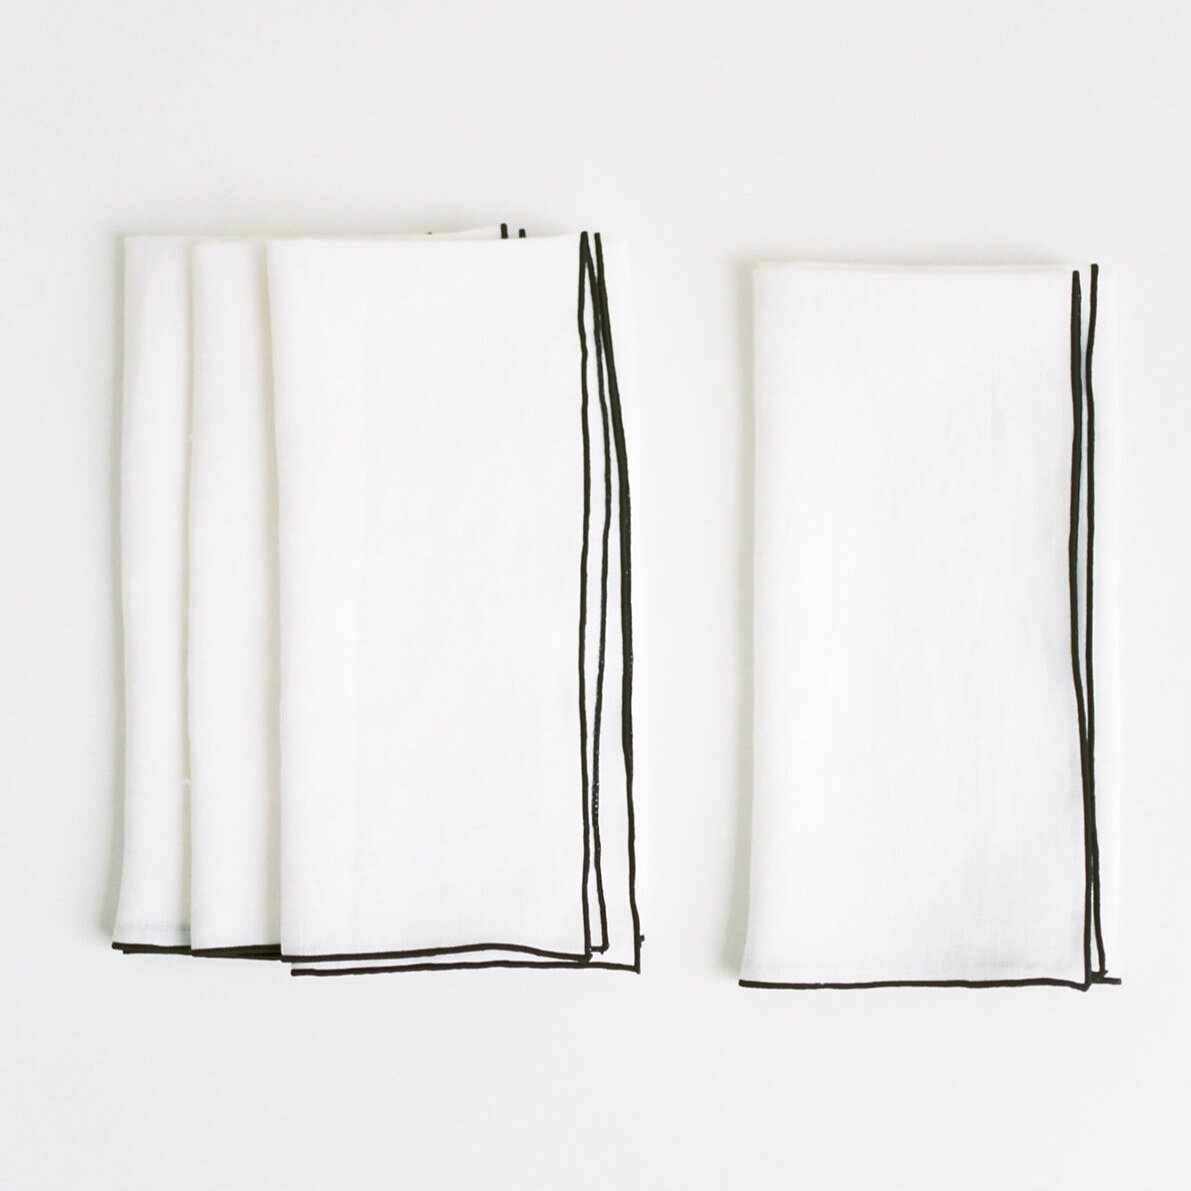 Stonewashed linen - pure 100% linen cocktail napkin or coaster antique  white with black stripes stone washed flax pre-washed laundered Europe  European linen napkins set – L i n e n C a s a